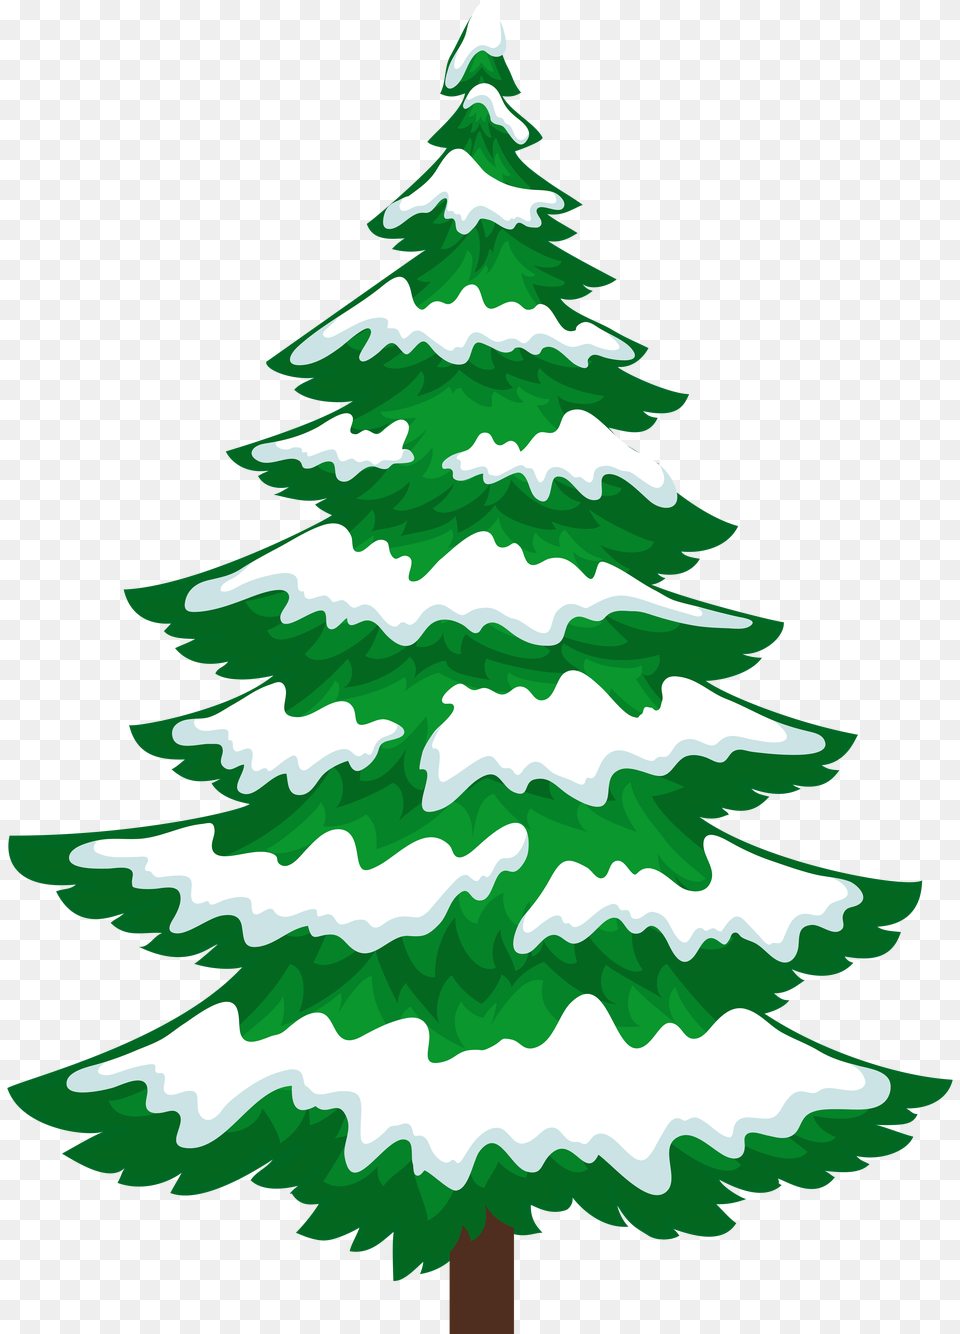 Pine Tree Silhouette Clip Art, Plant, Fir, Christmas, Christmas Decorations Png